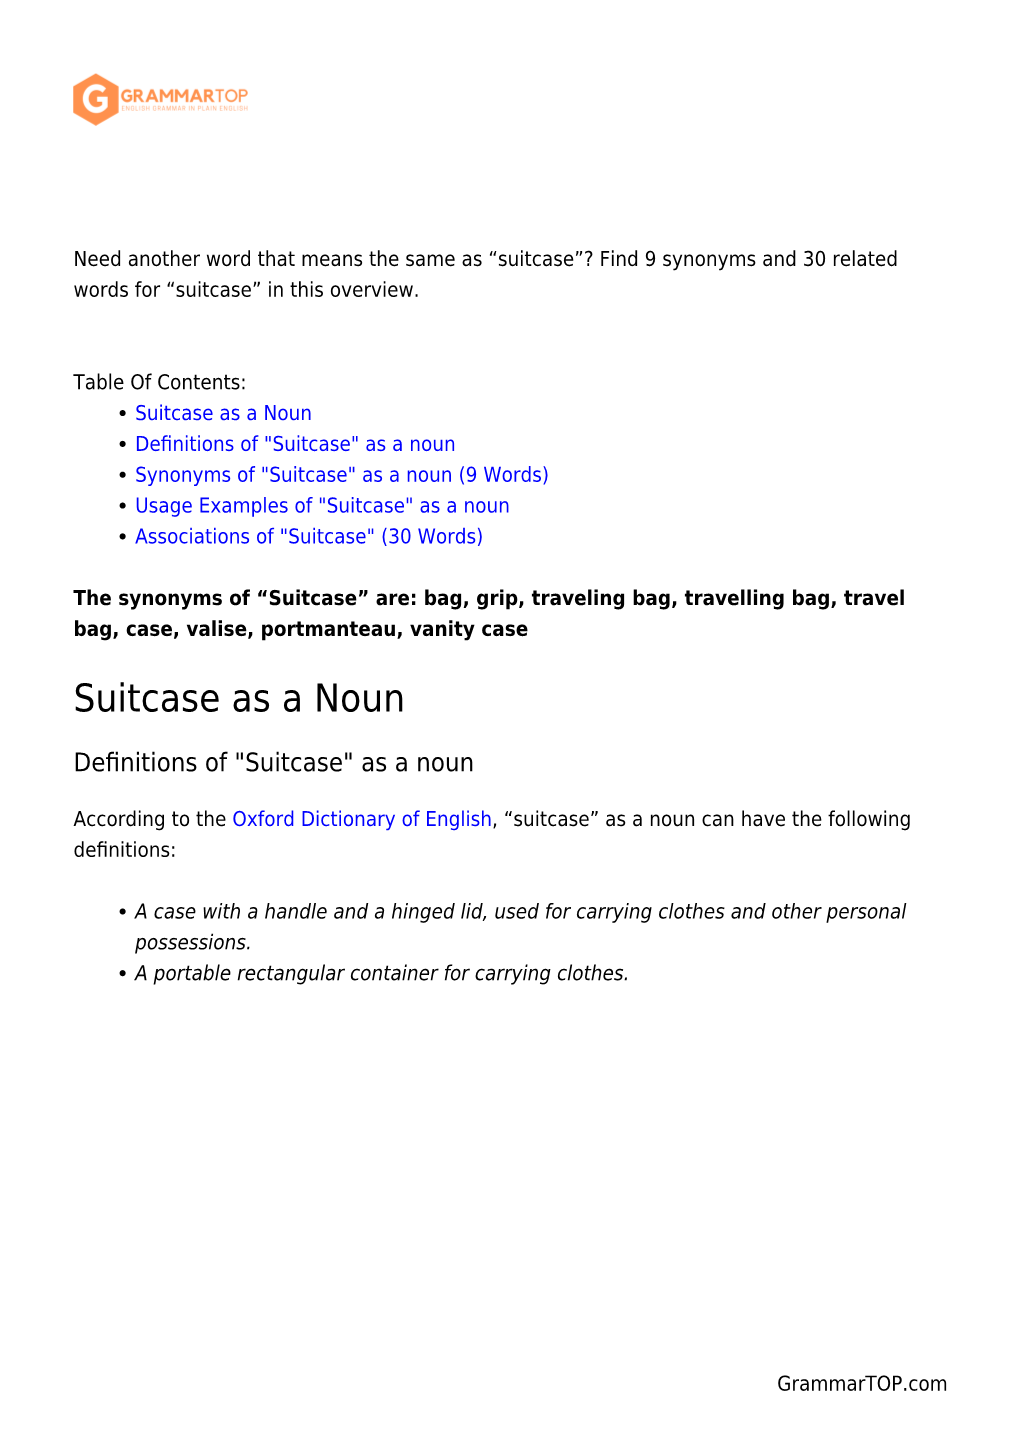 Suitcase”? Find 9 Synonyms and 30 Related Words for “Suitcase” in This Overview